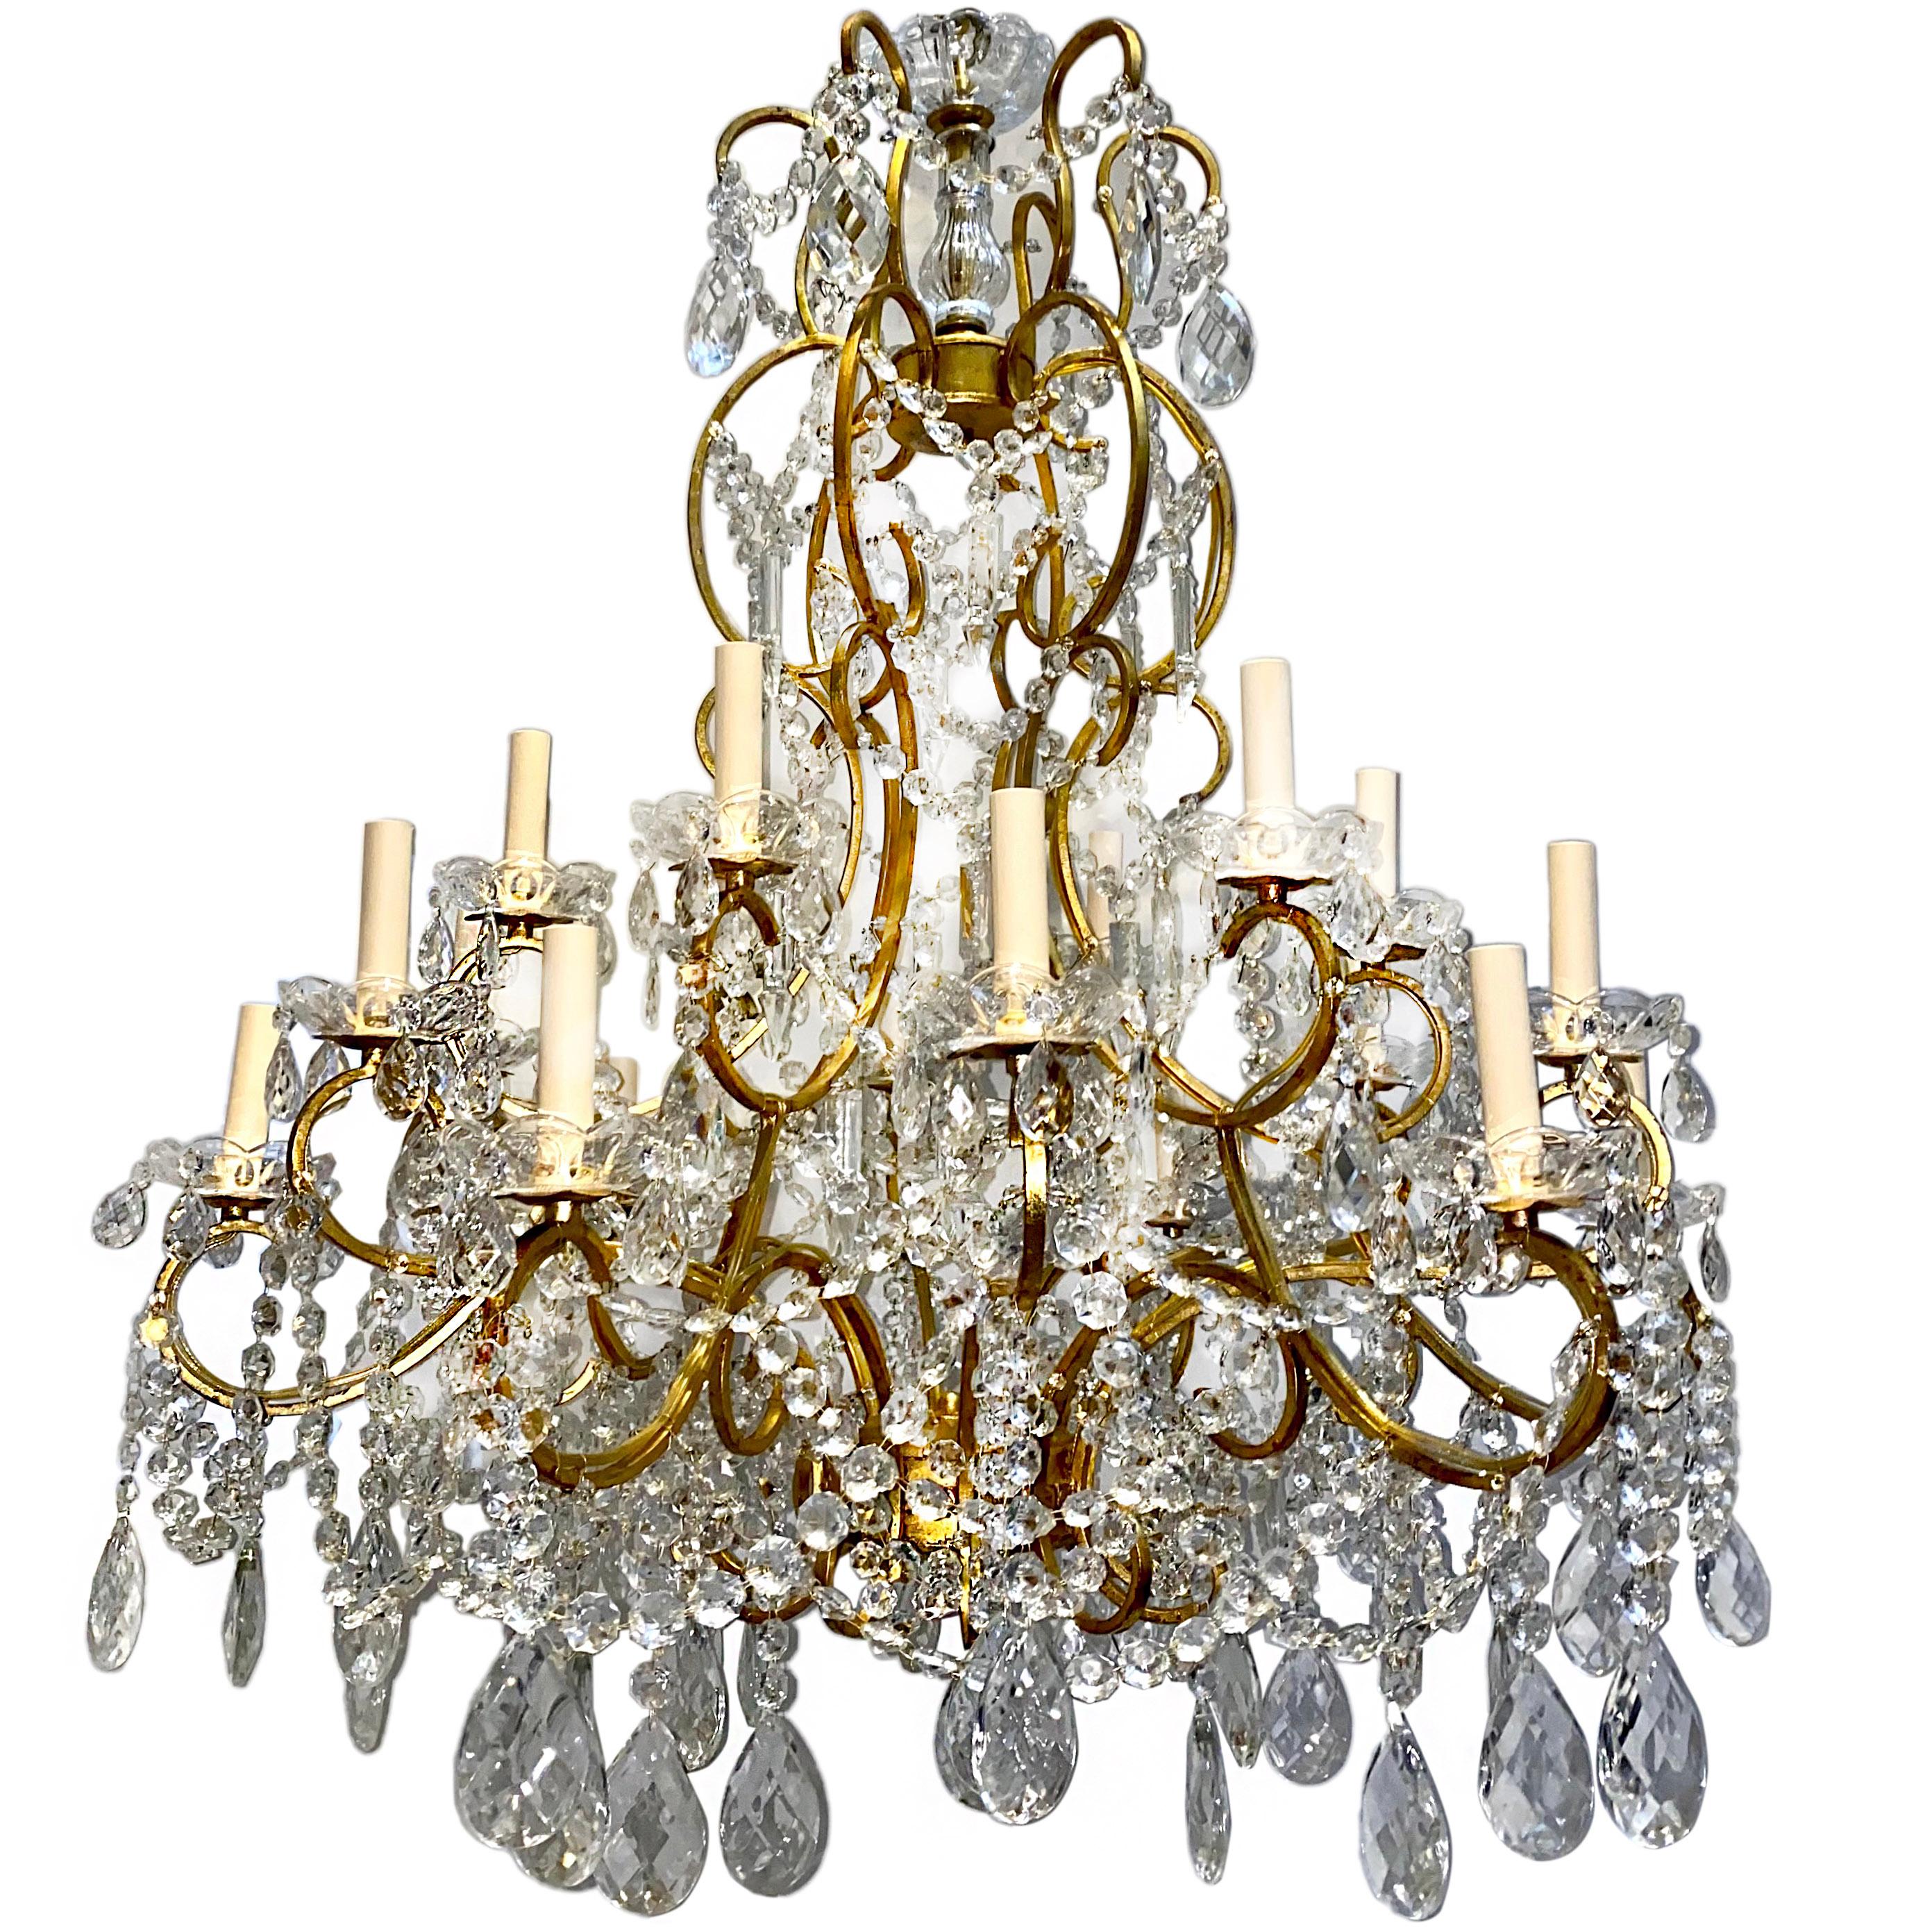 A pair of large circa 1920s Italian gilt metal and crystal eighteen-arm chandeliers with original patina. Sold individually.

Measurements:
Diameter: 34